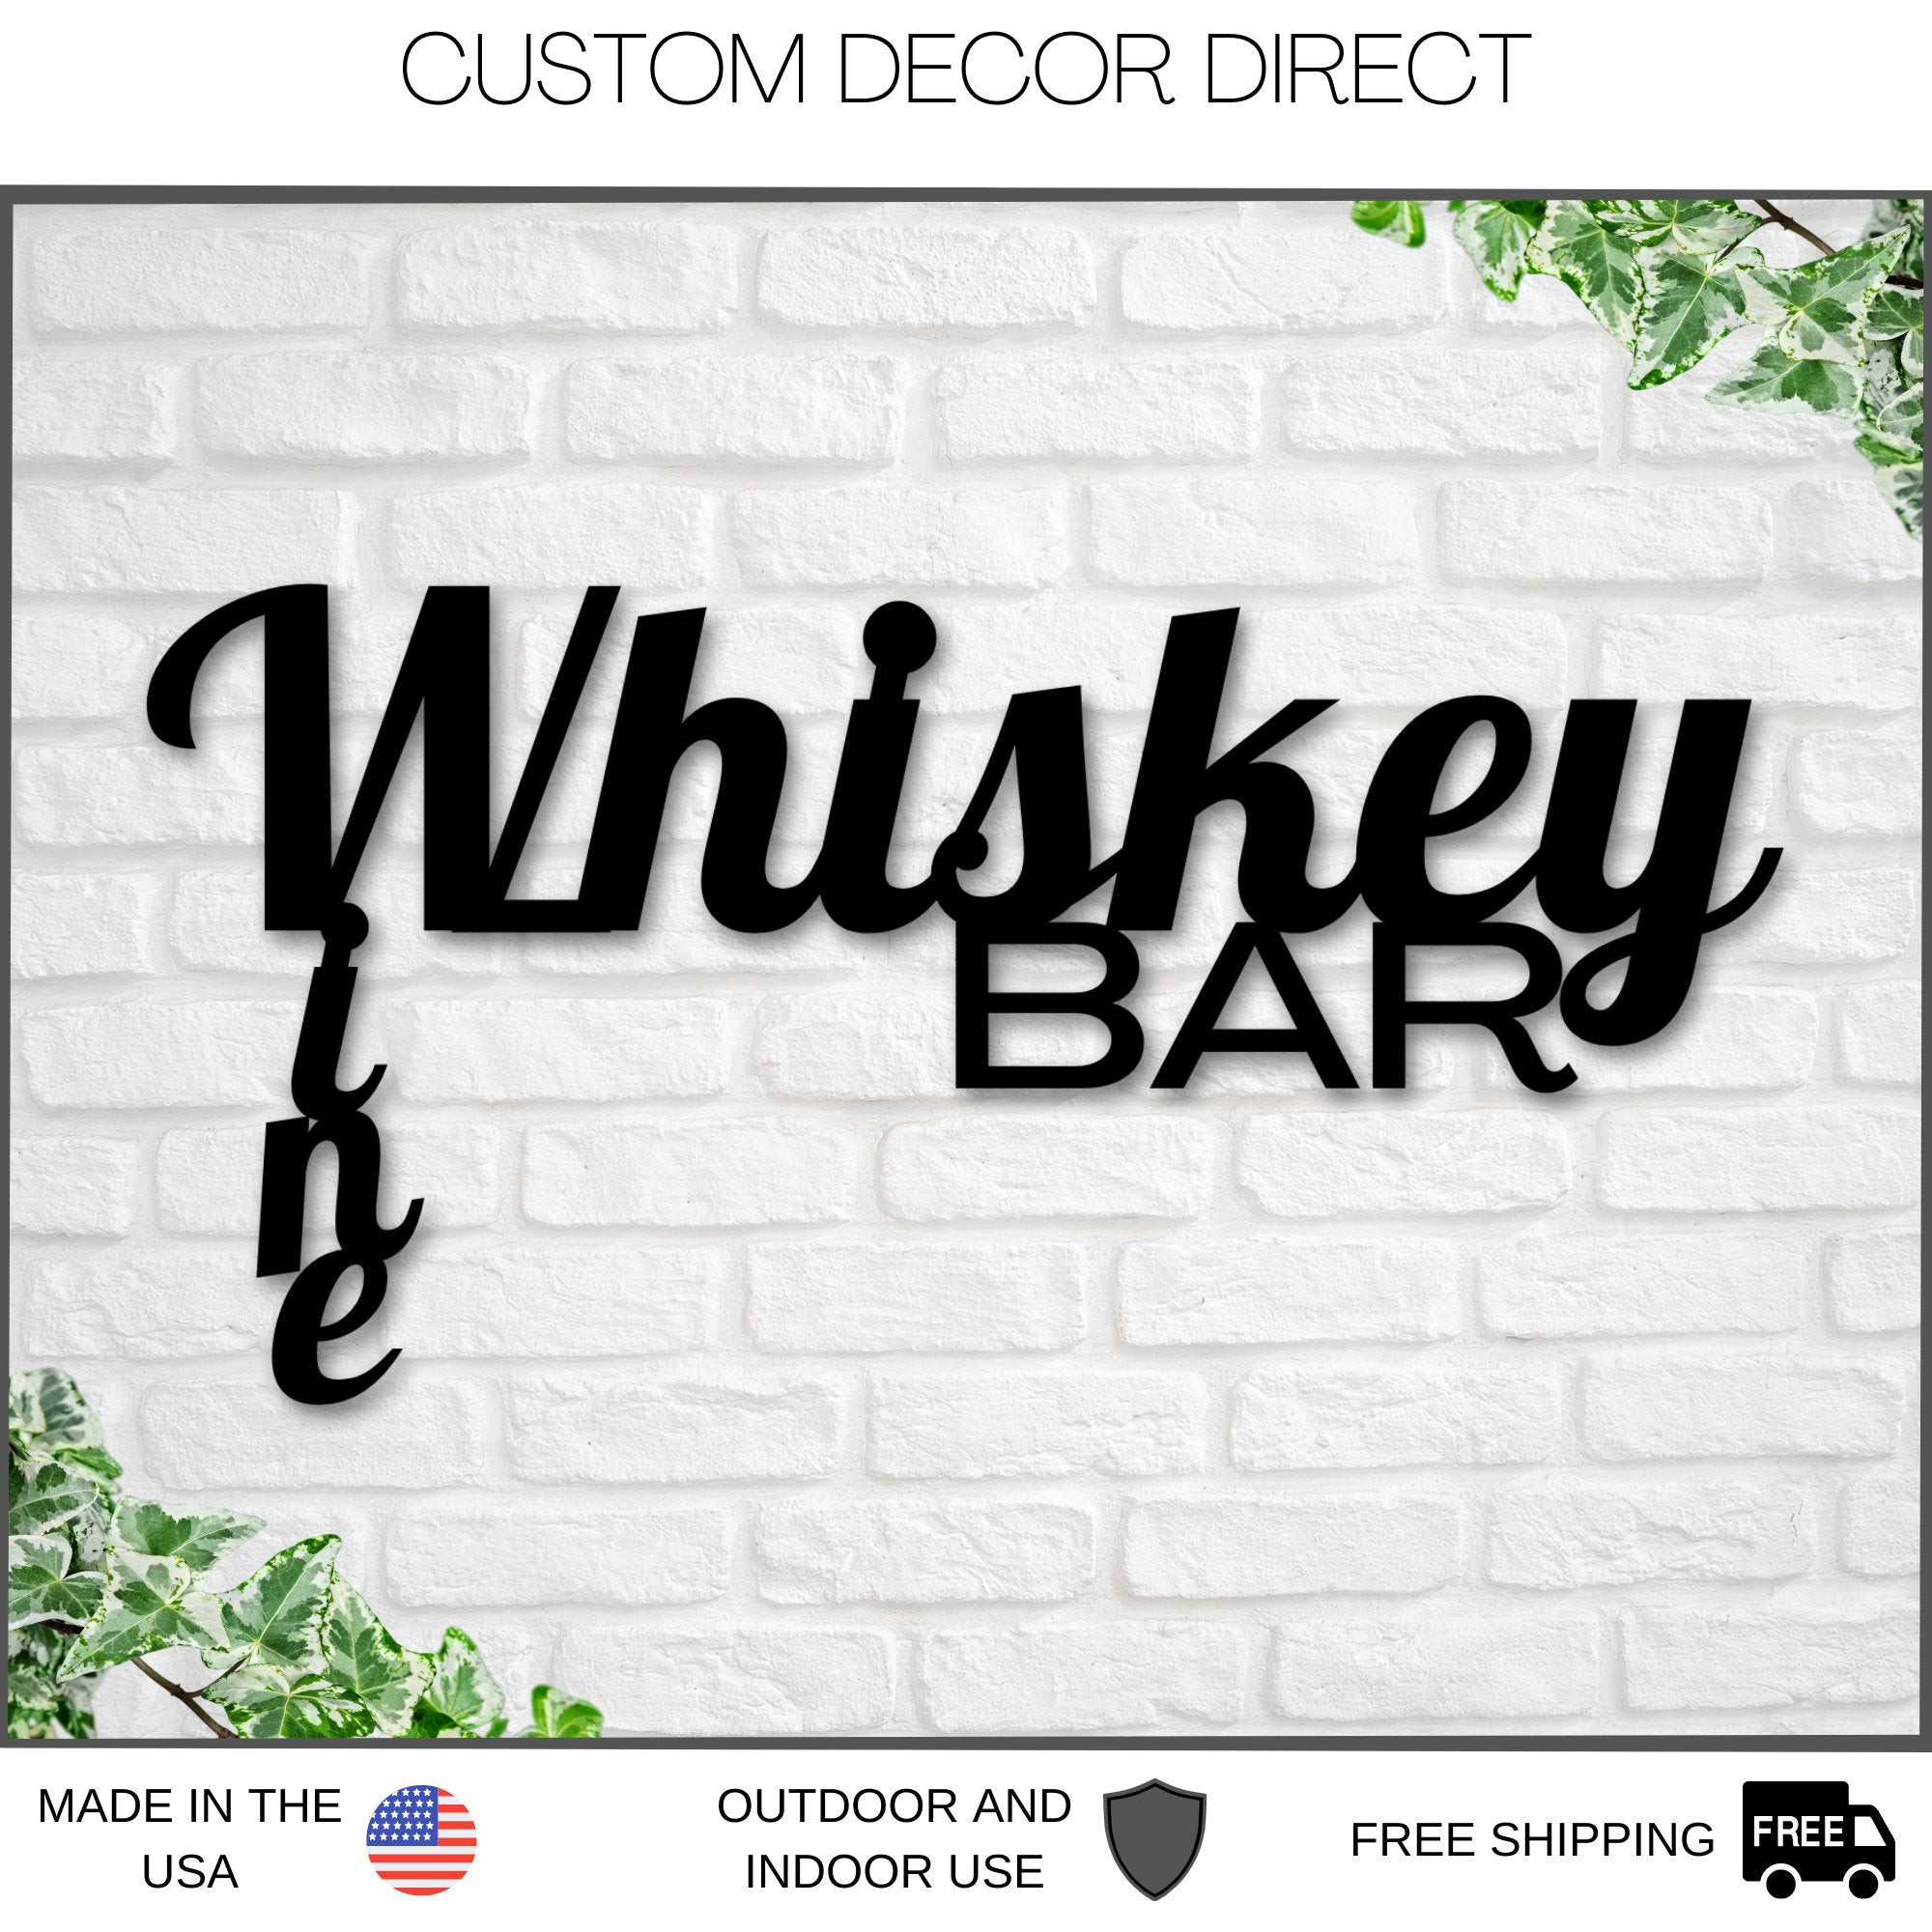 Personalized Bar Metal Sign, Whiskey Wine Bar Sign, Rustic Home Decor, Basement Bar, Wine Decor, Wine Bar Sign, Mother's Day Gift, Wine Gift Laser Cut Metal Signs Custom Gift Ideas 12x12IN